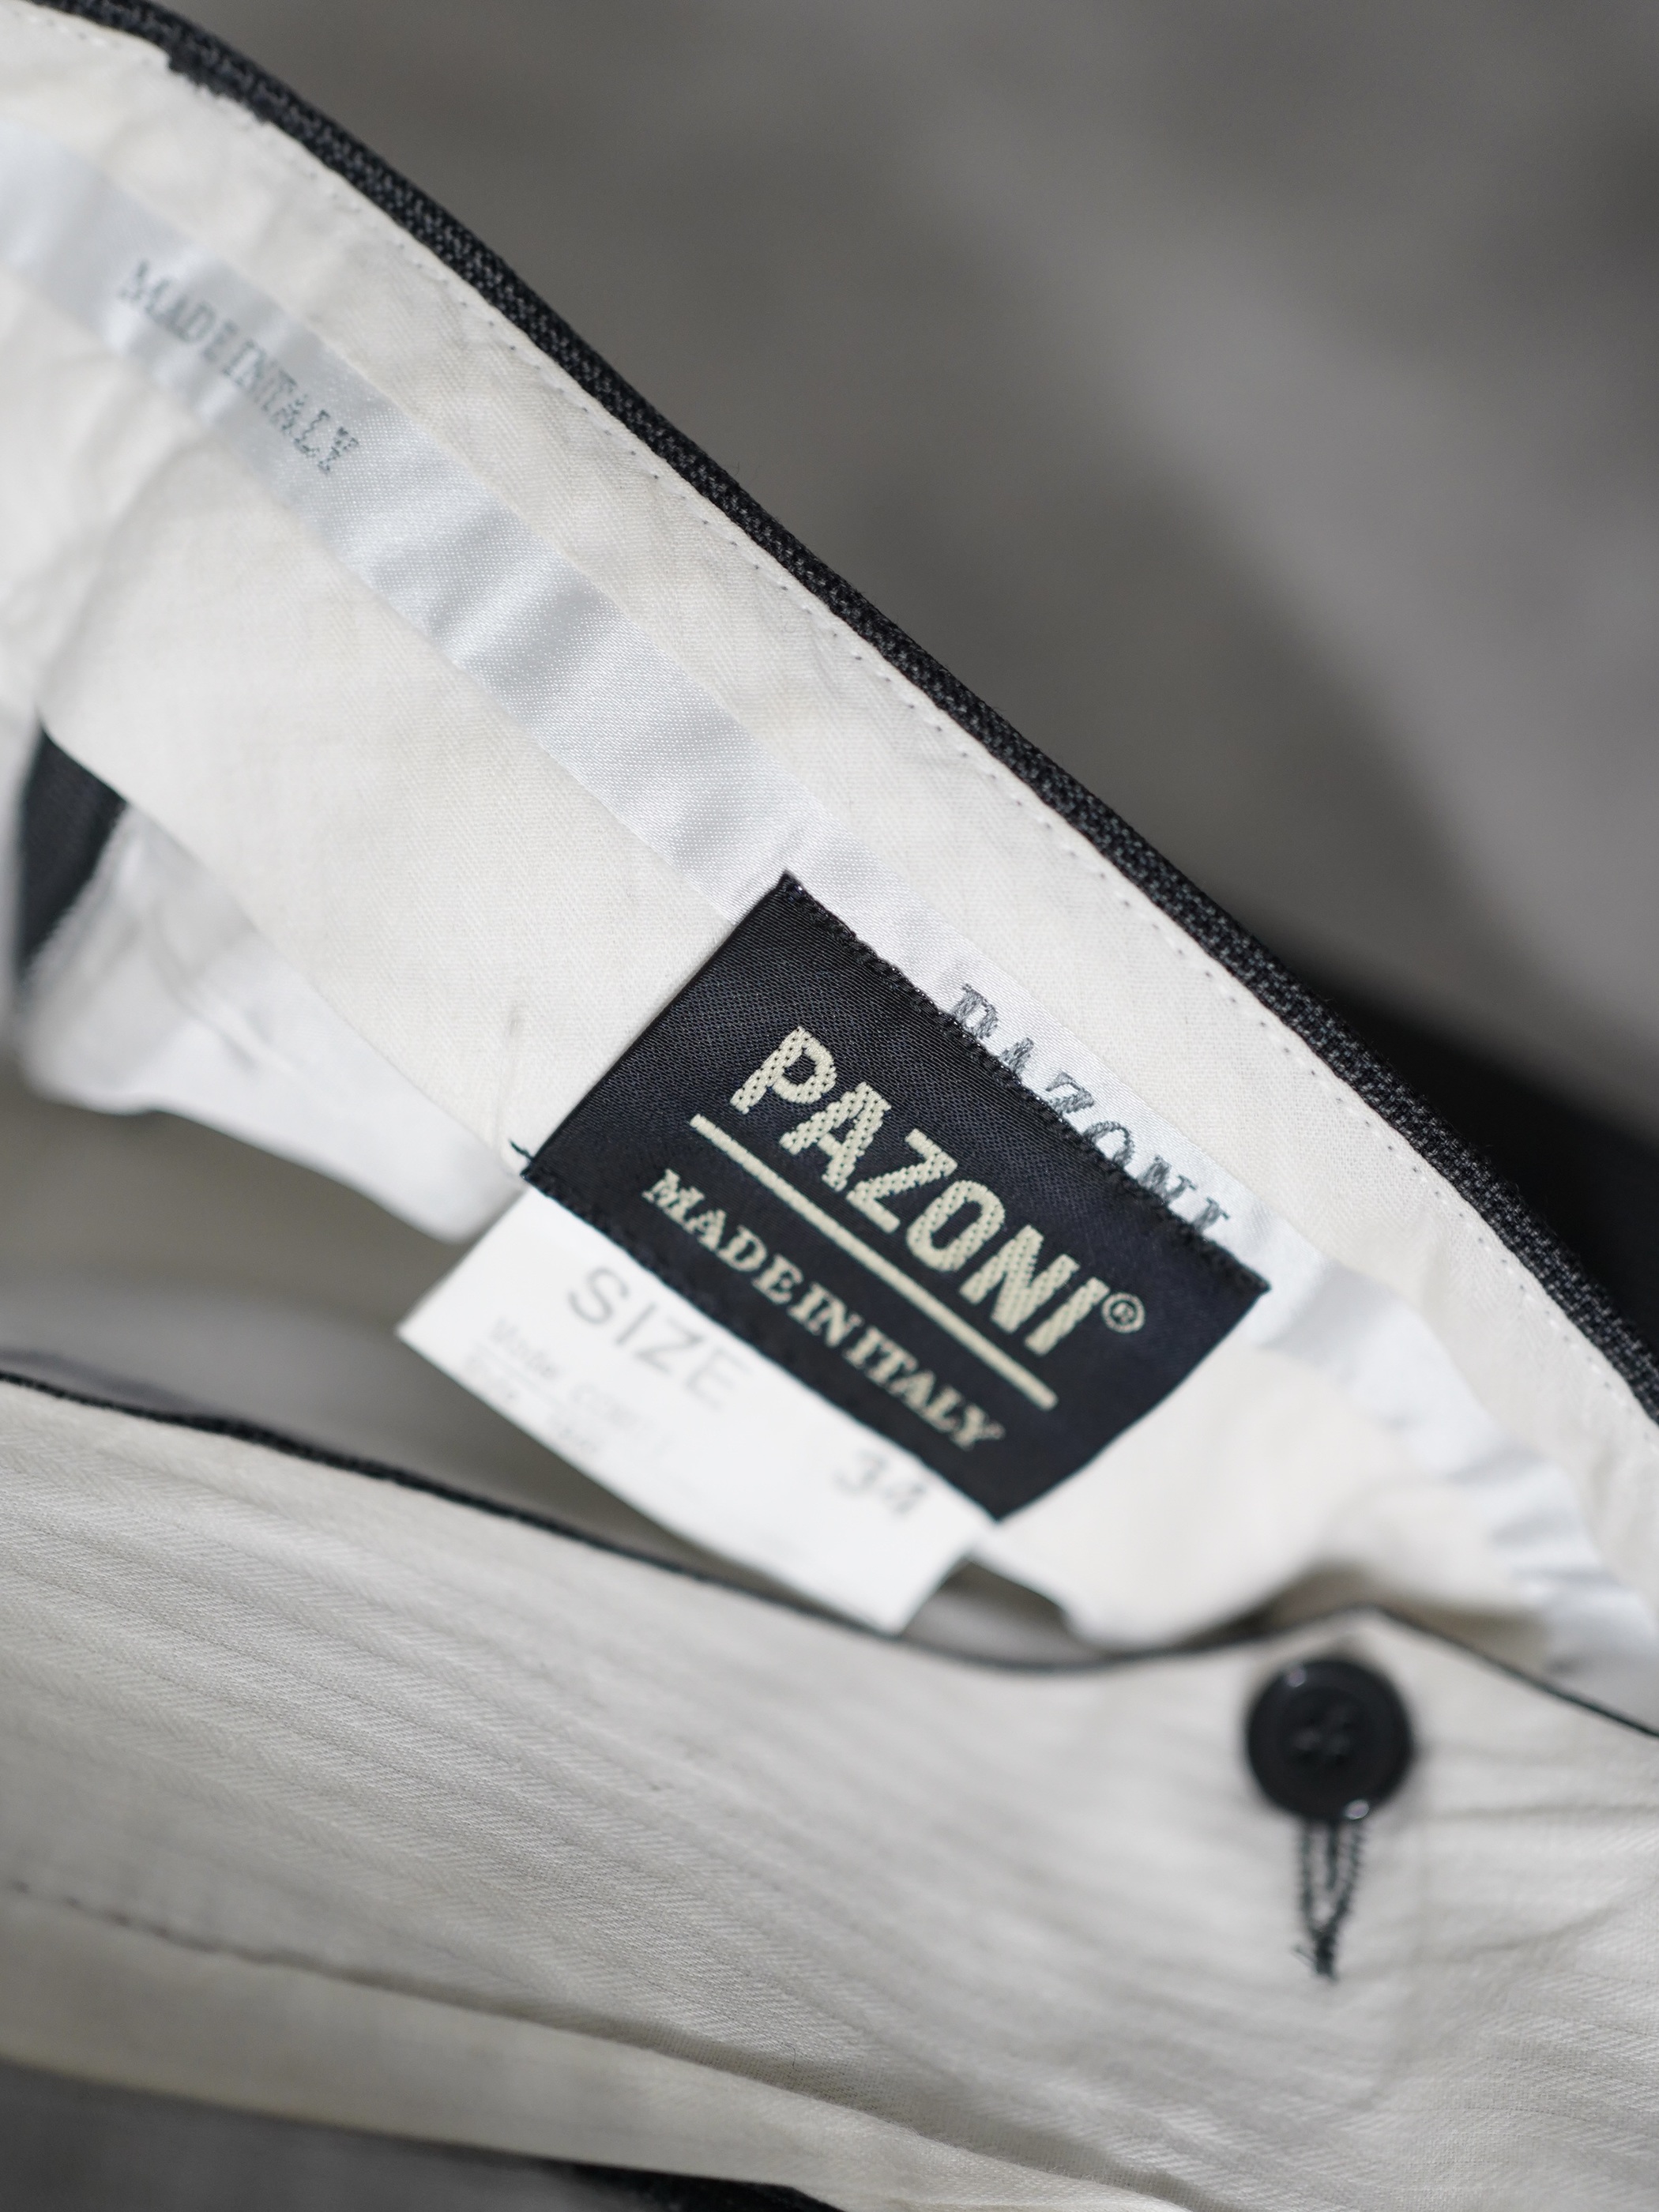 PAZONI 2tuck dress trousers / Made in Italy